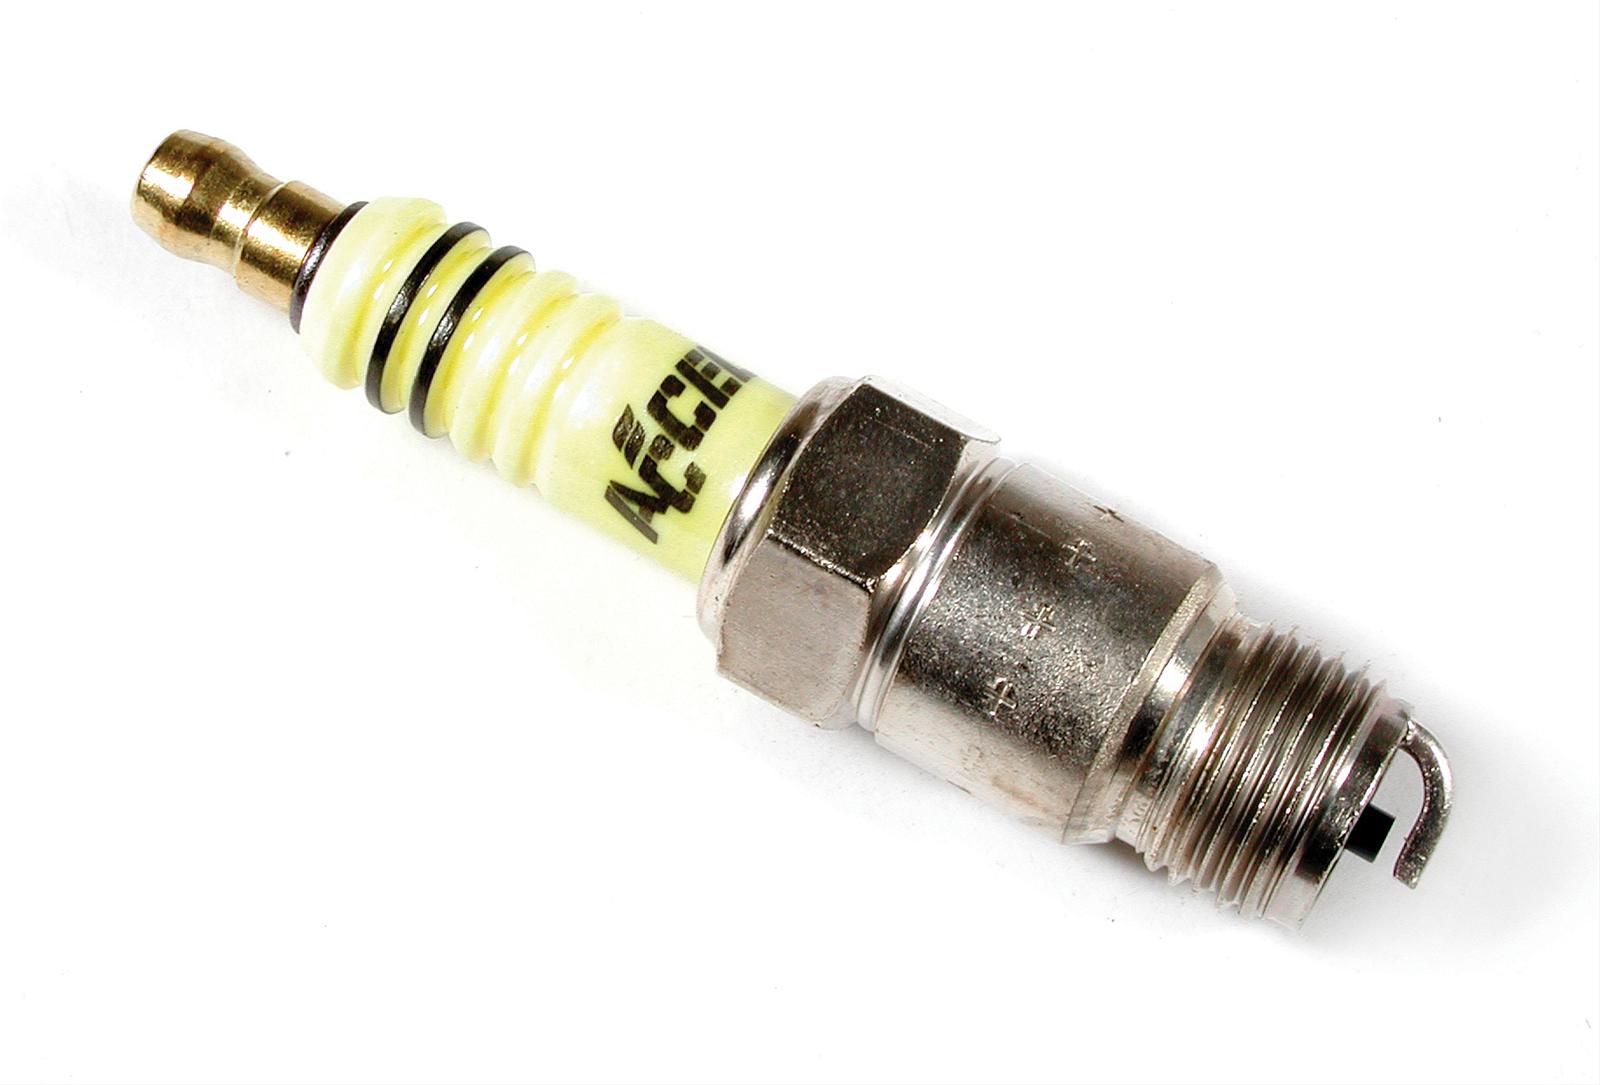 Details about   8 Accel 0566 HP Copper Spark Plugs 14mm Taper .460 Reach  Chevrolet 69-89